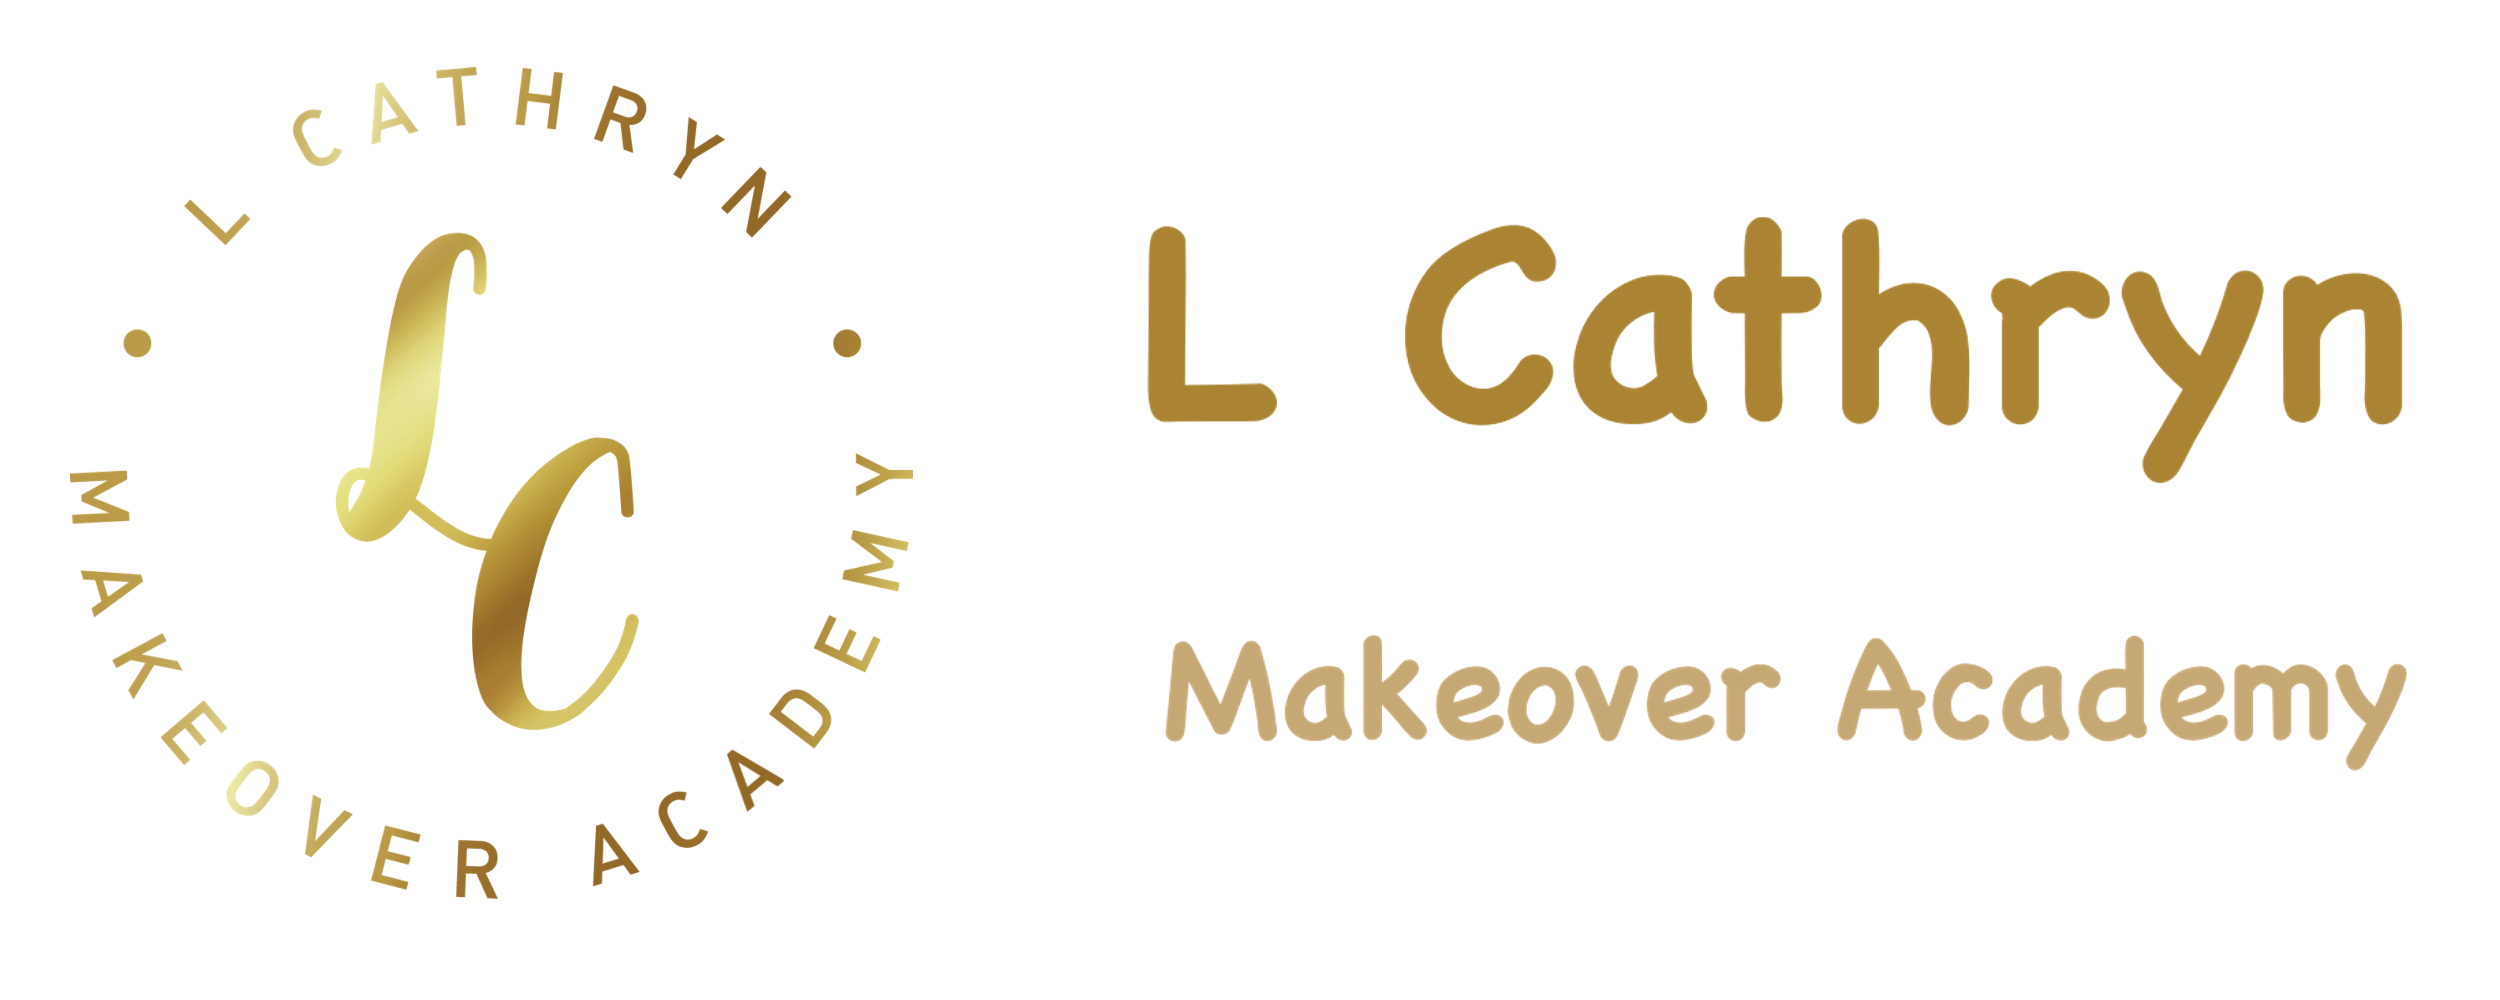 L Cathryn Makeover Academy